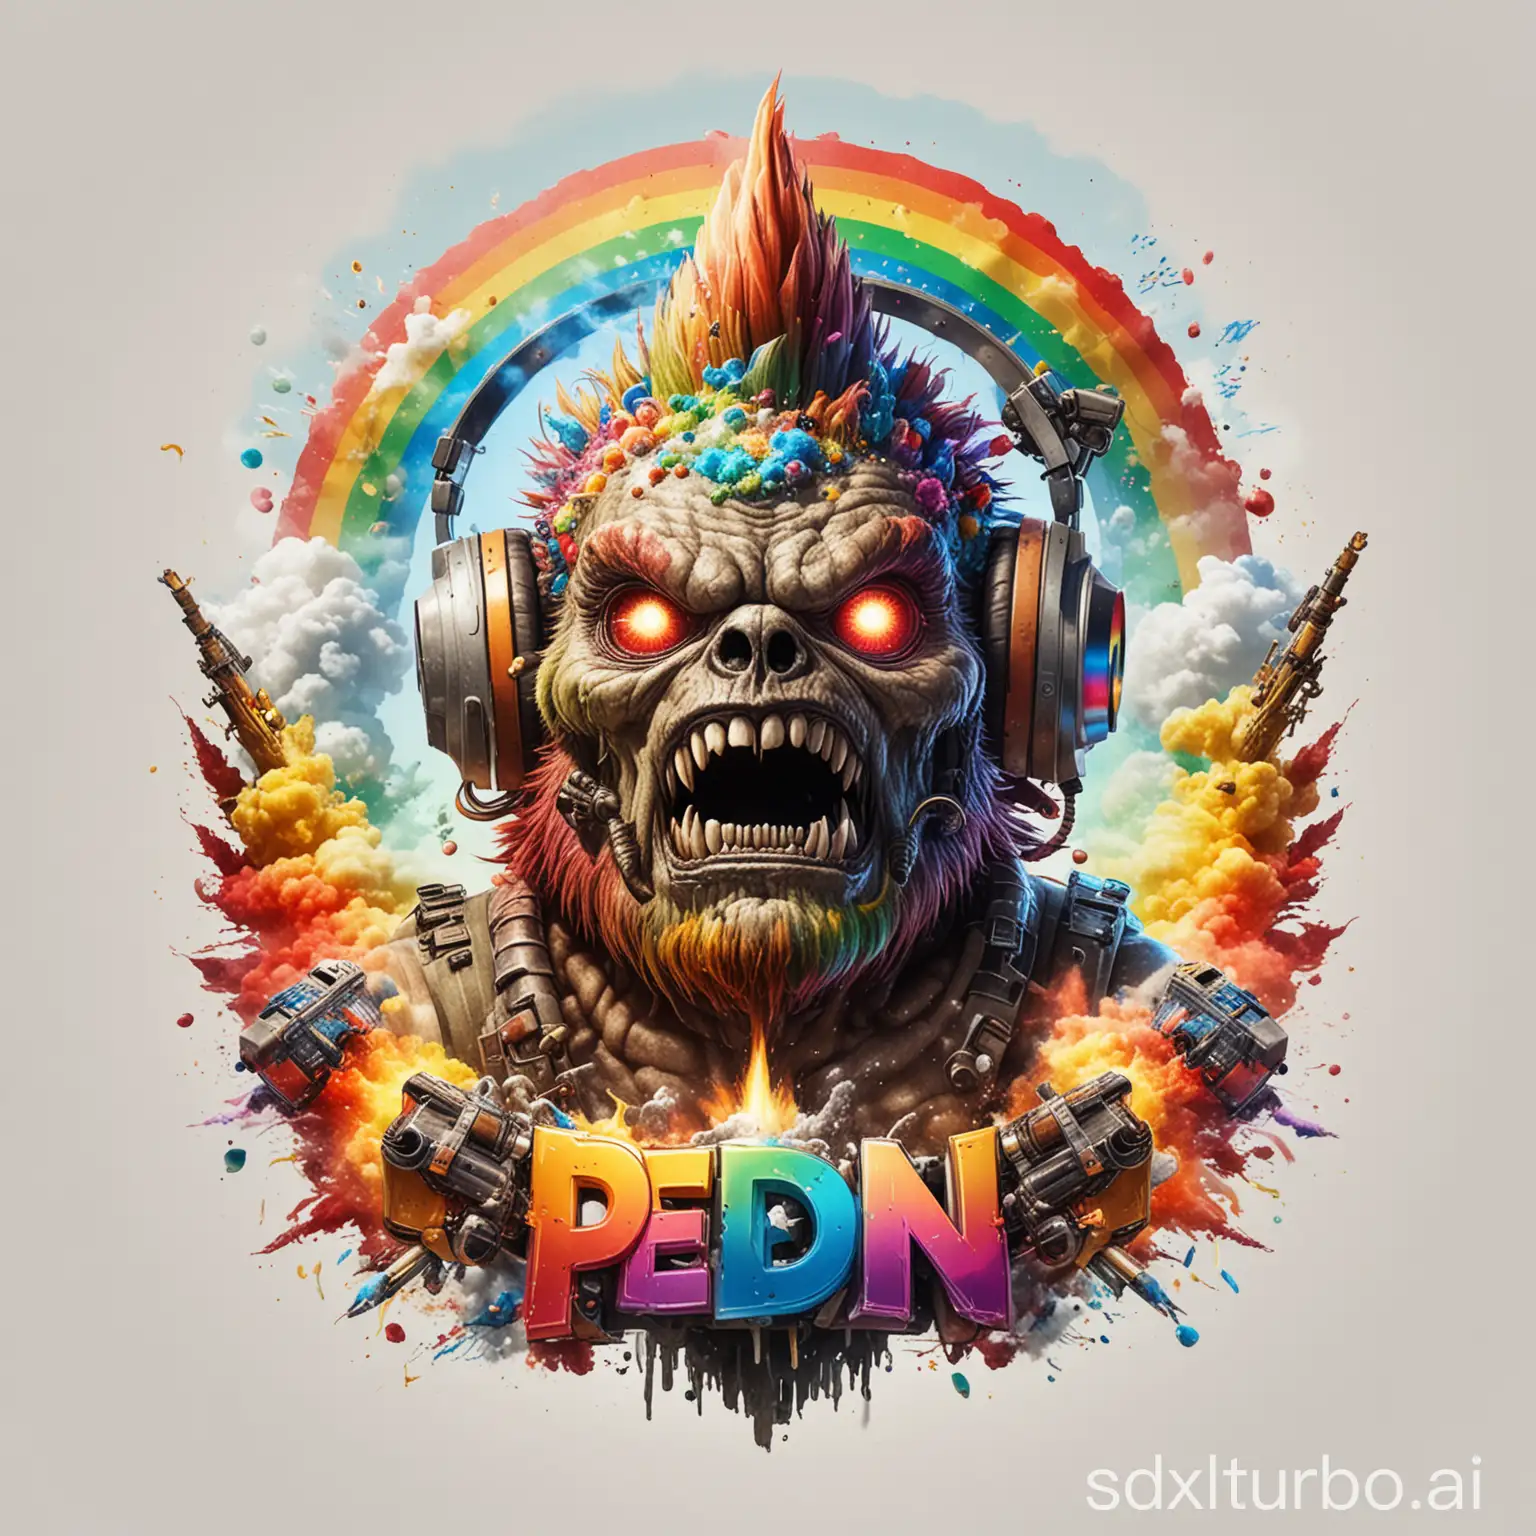  Round Logo "PEON" with Bavarian super evil monster freak nerd rocket launcher machinegun big beer headset and smoke explosion fire shining rainbow on white background

(The input does not appear to be in another language, so I will repeat the input verbatim as per the process.)